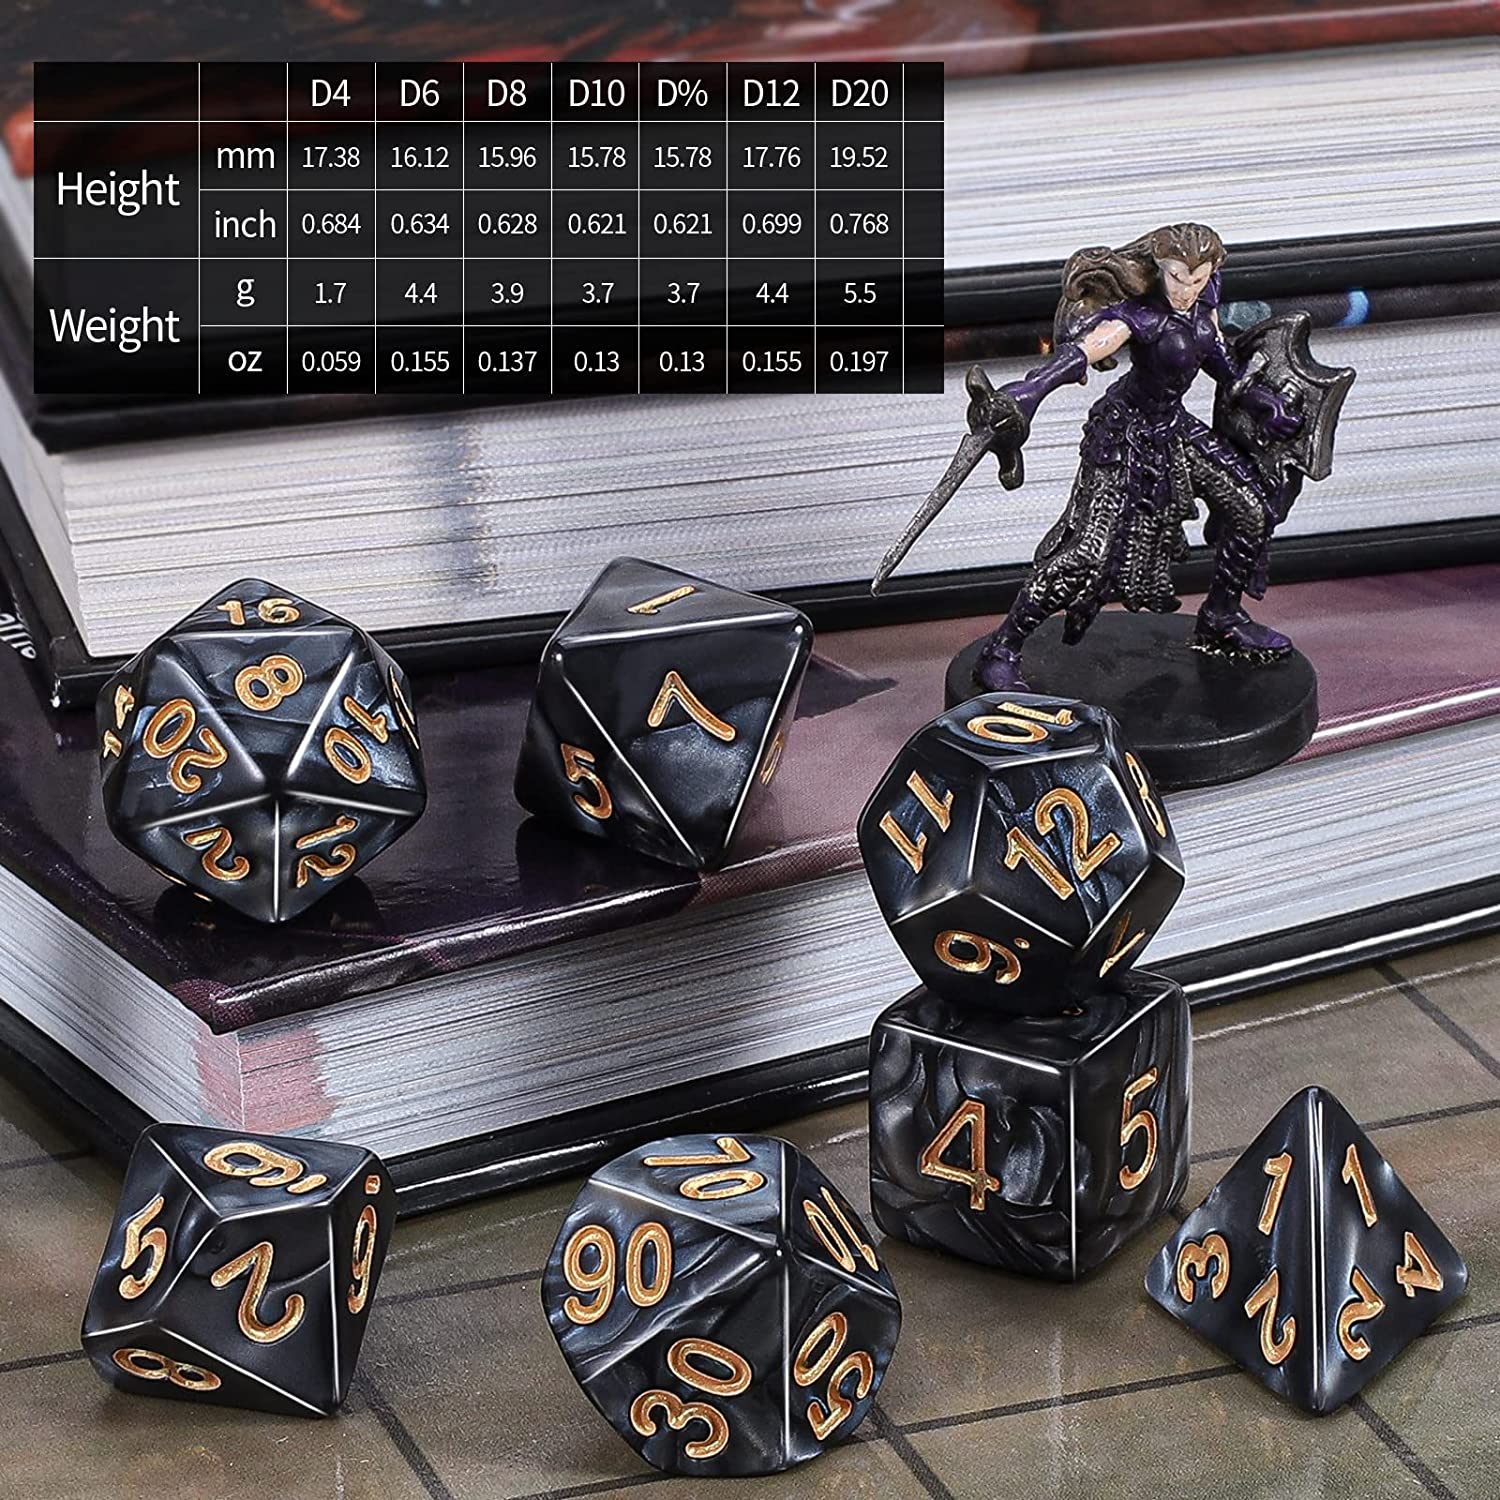 DND Dice Sets - 26 X 7 Polyhedral Dice (182pcs) with a Large